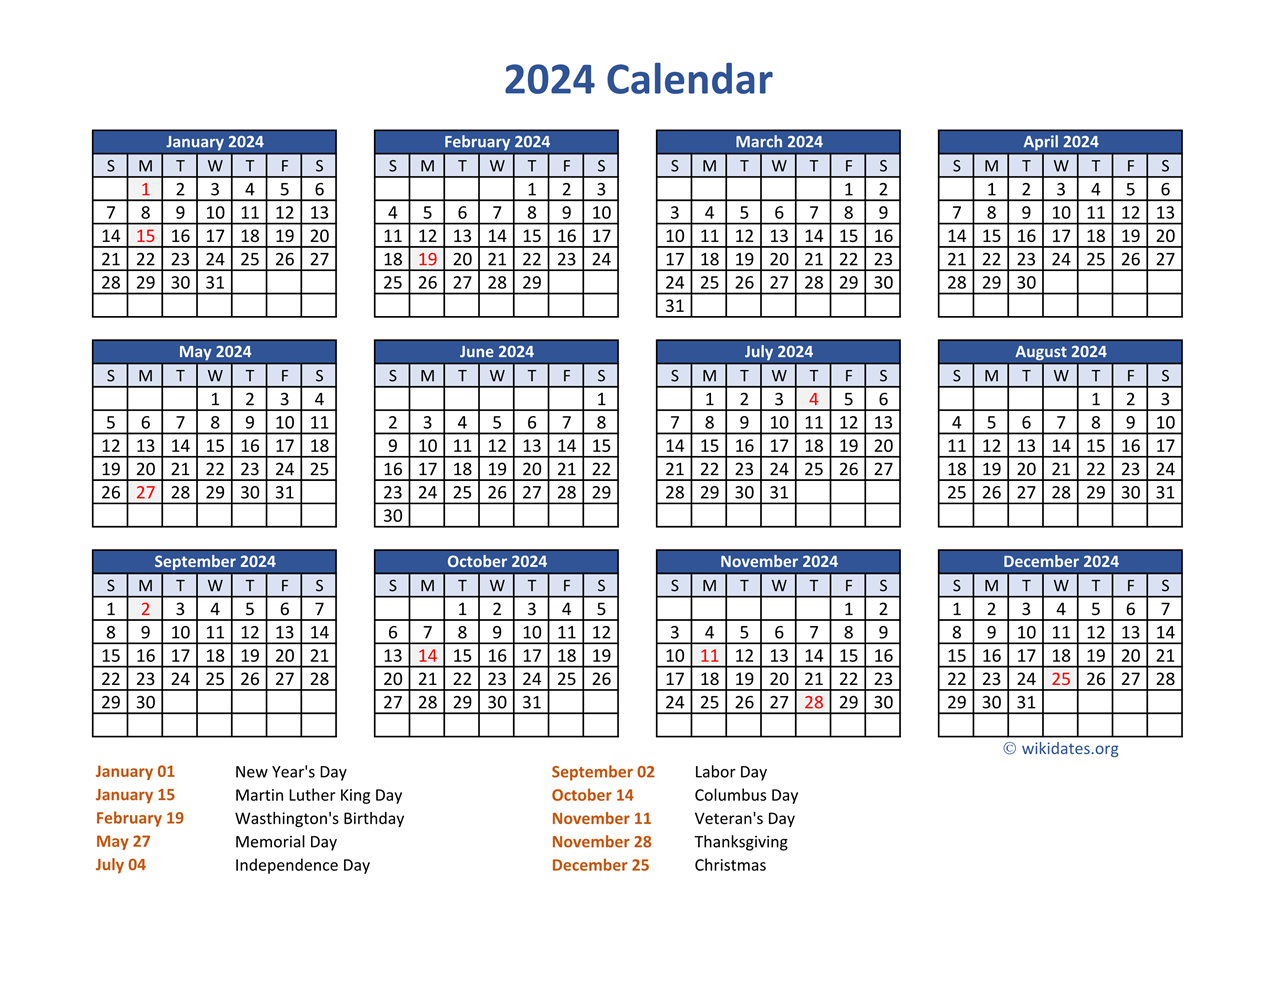 Pdf Calendar 2024 With Federal Holidays | Wikidates for Free Printable Calendar 2024 With Holidays